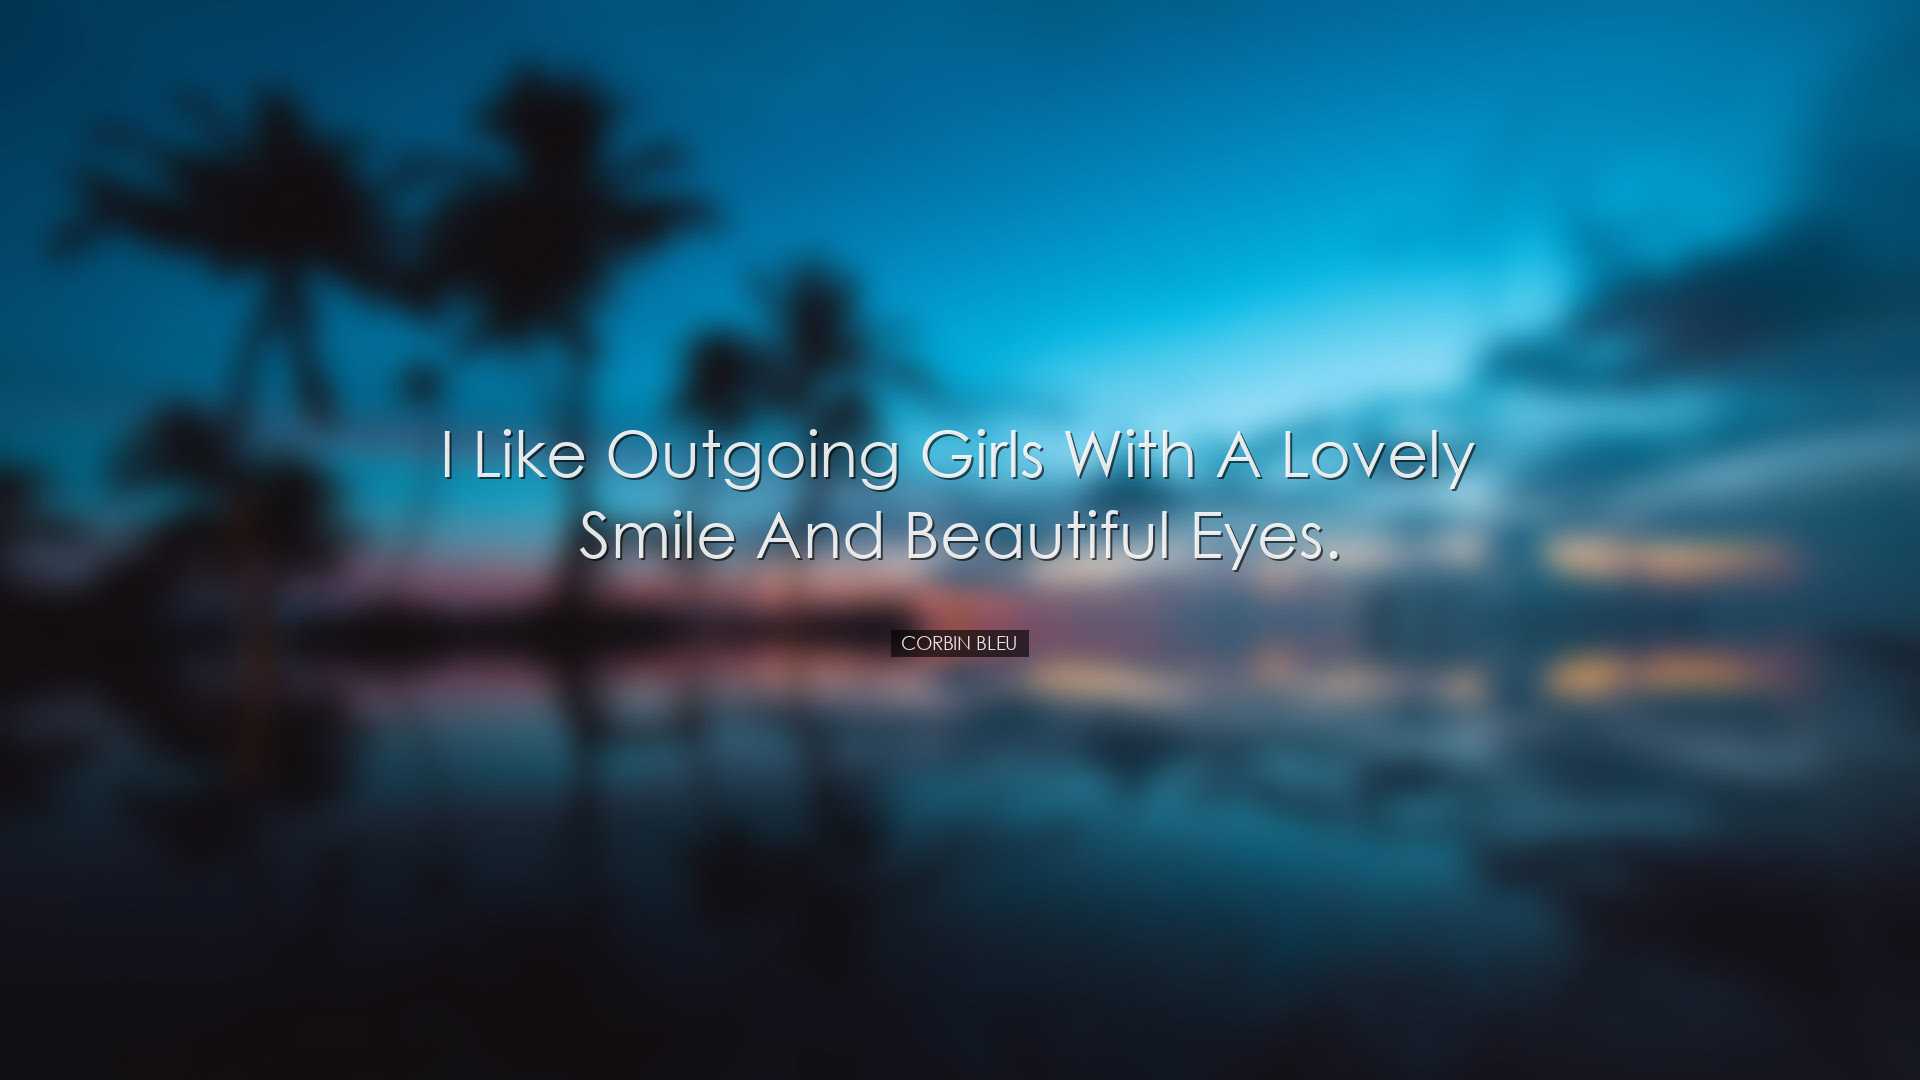 I like outgoing girls with a lovely smile and beautiful eyes. - Co